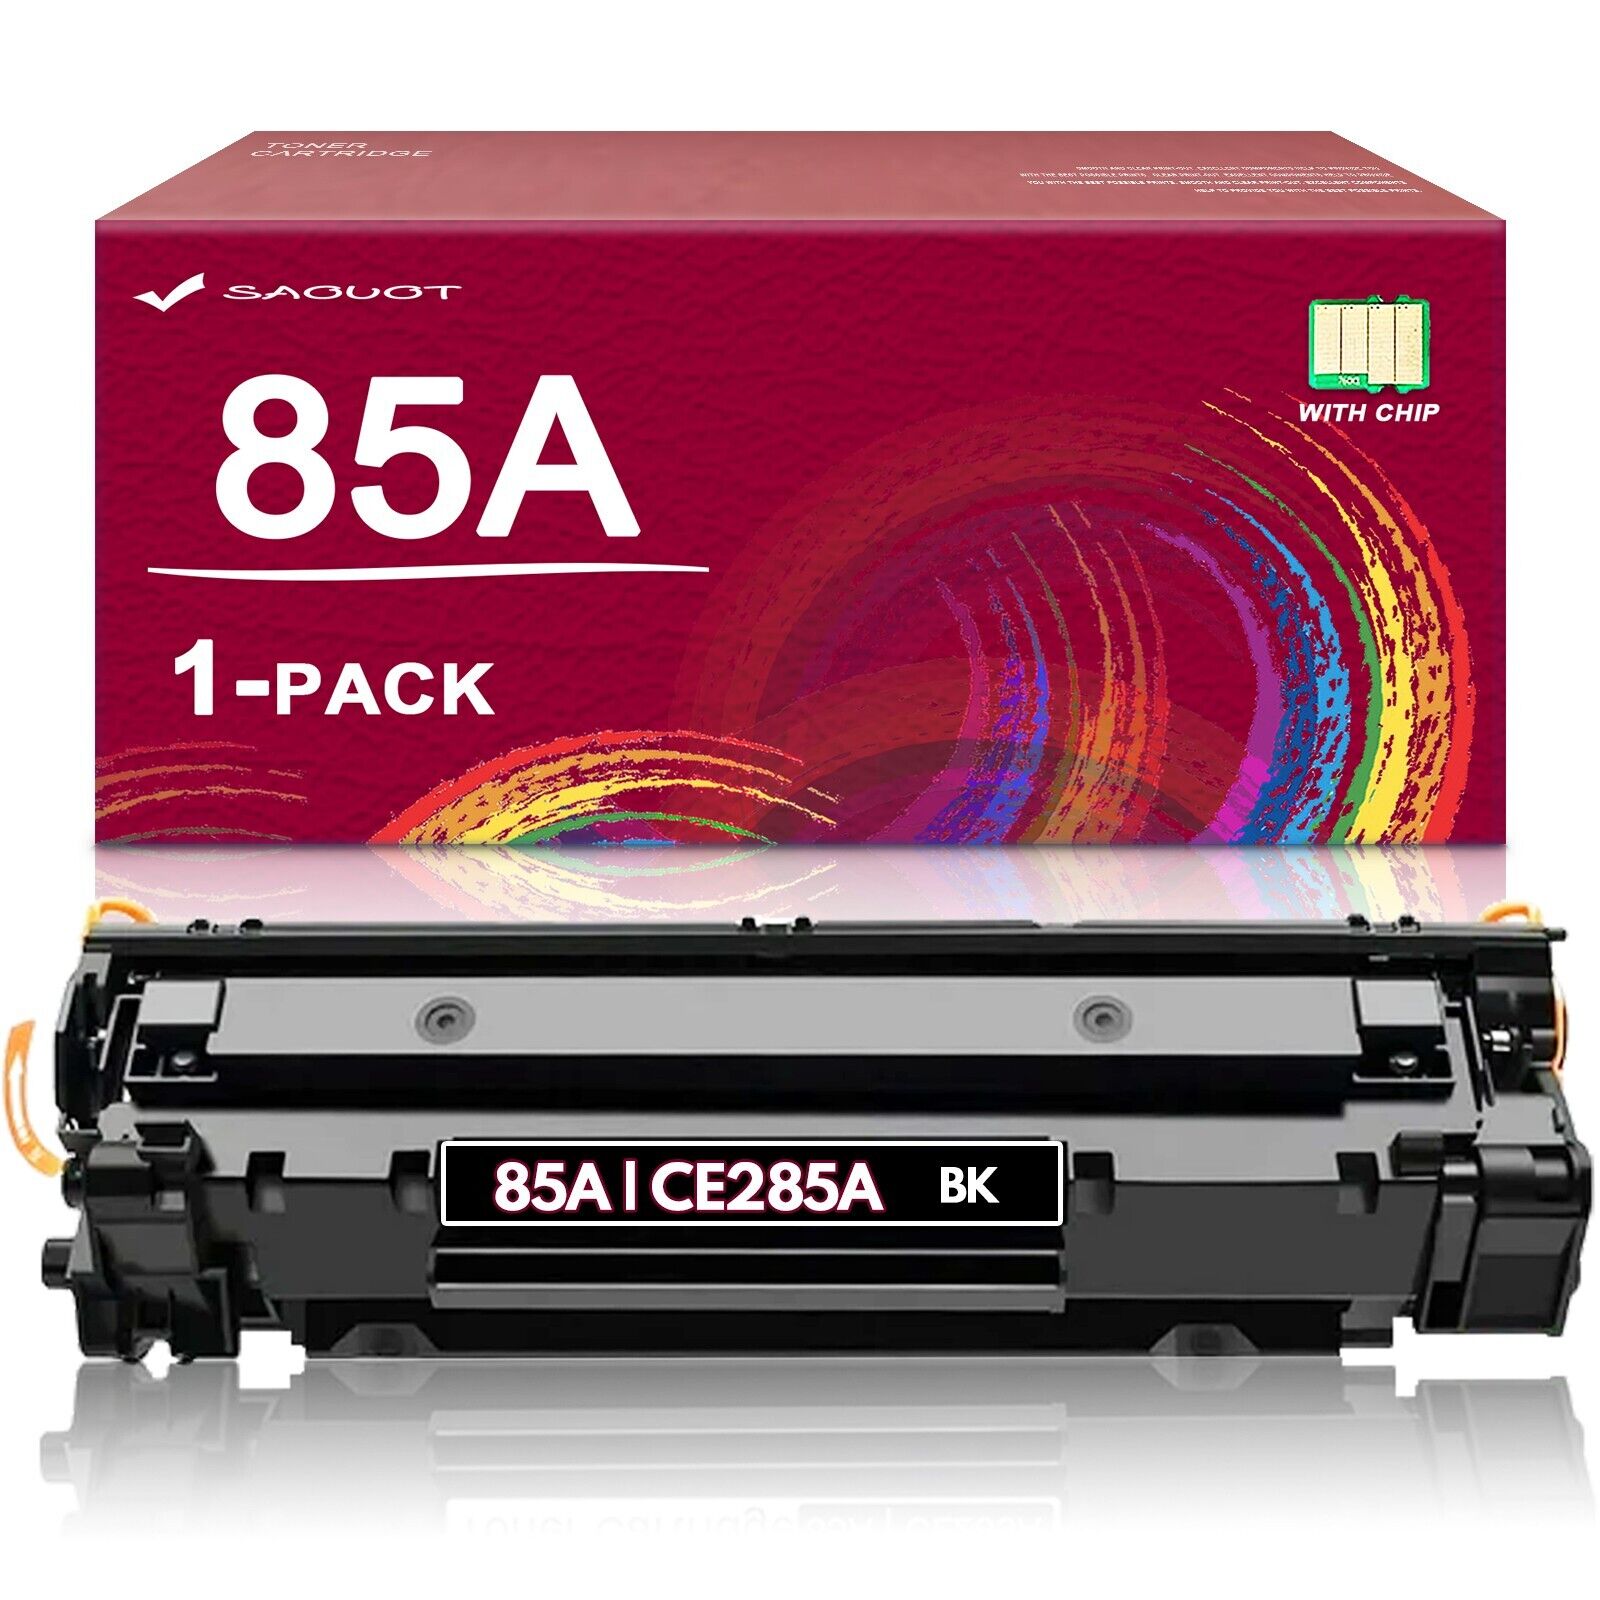 85A | CE285A Toner Cartridge Black Replacement for HP 85A Pro P1102W M1212nf